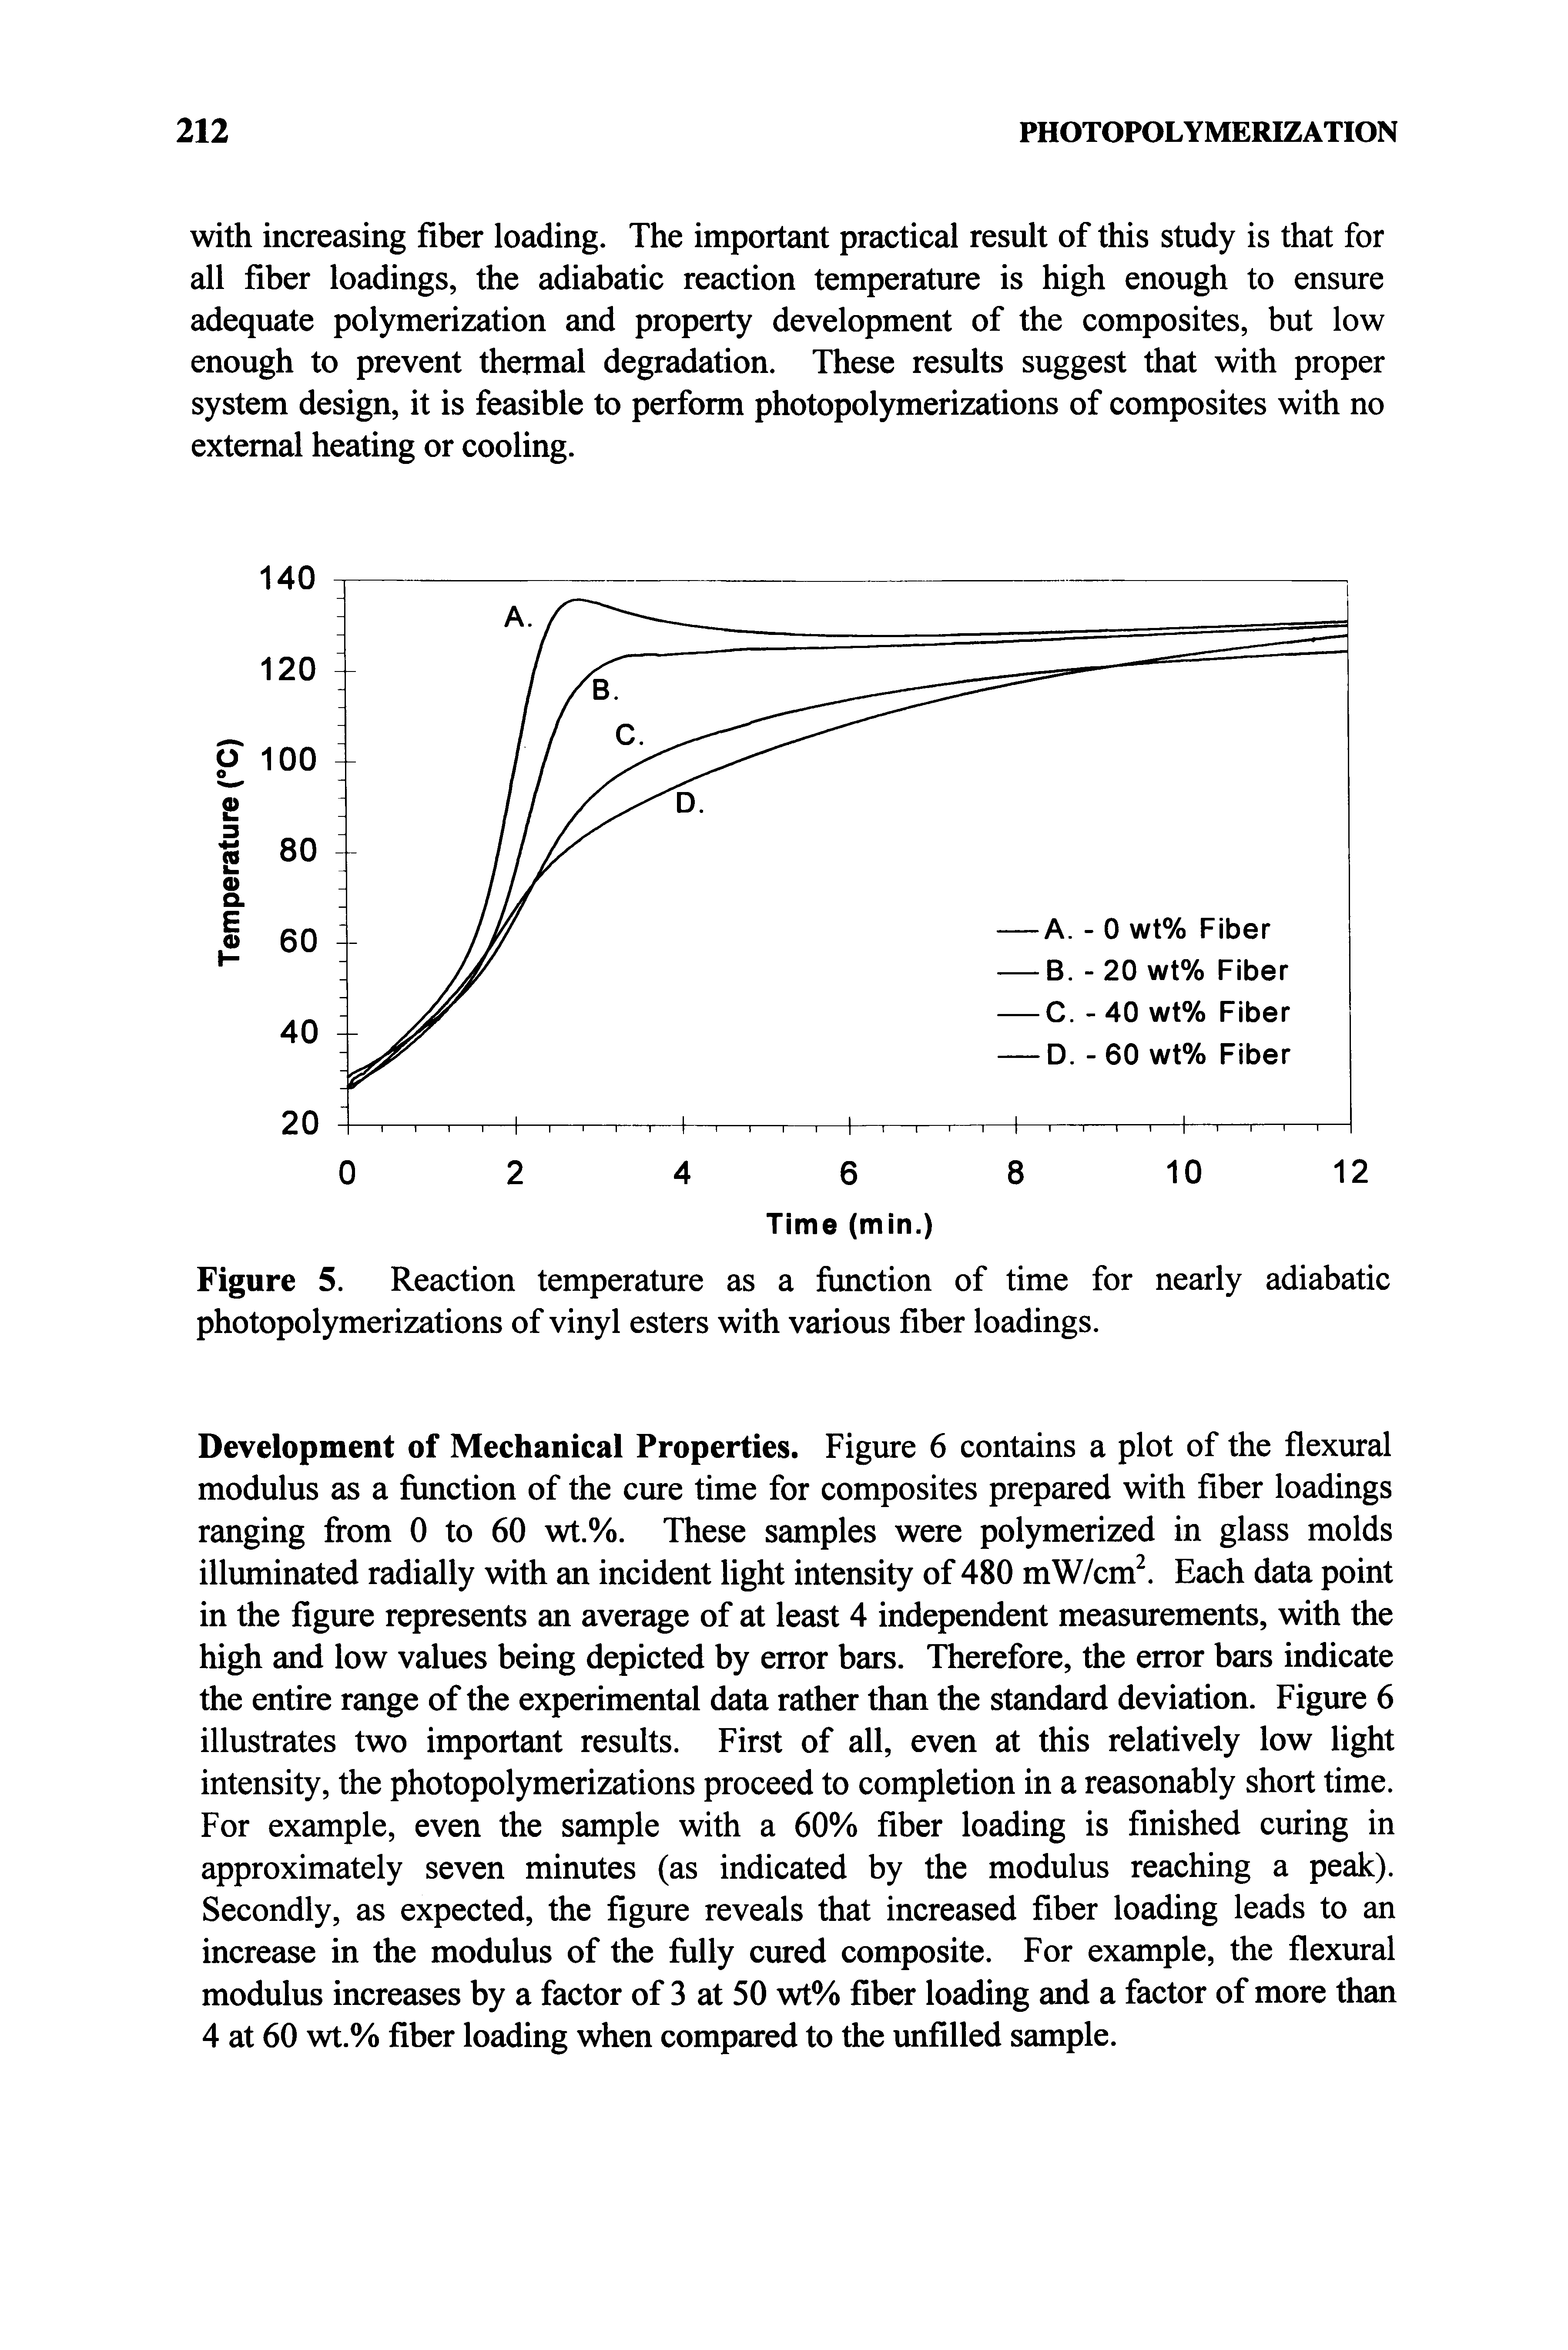 Figure 5. Reaction temperature as a function of time for nearly adiabatic photopolymerizations of vinyl esters with various fiber loadings.